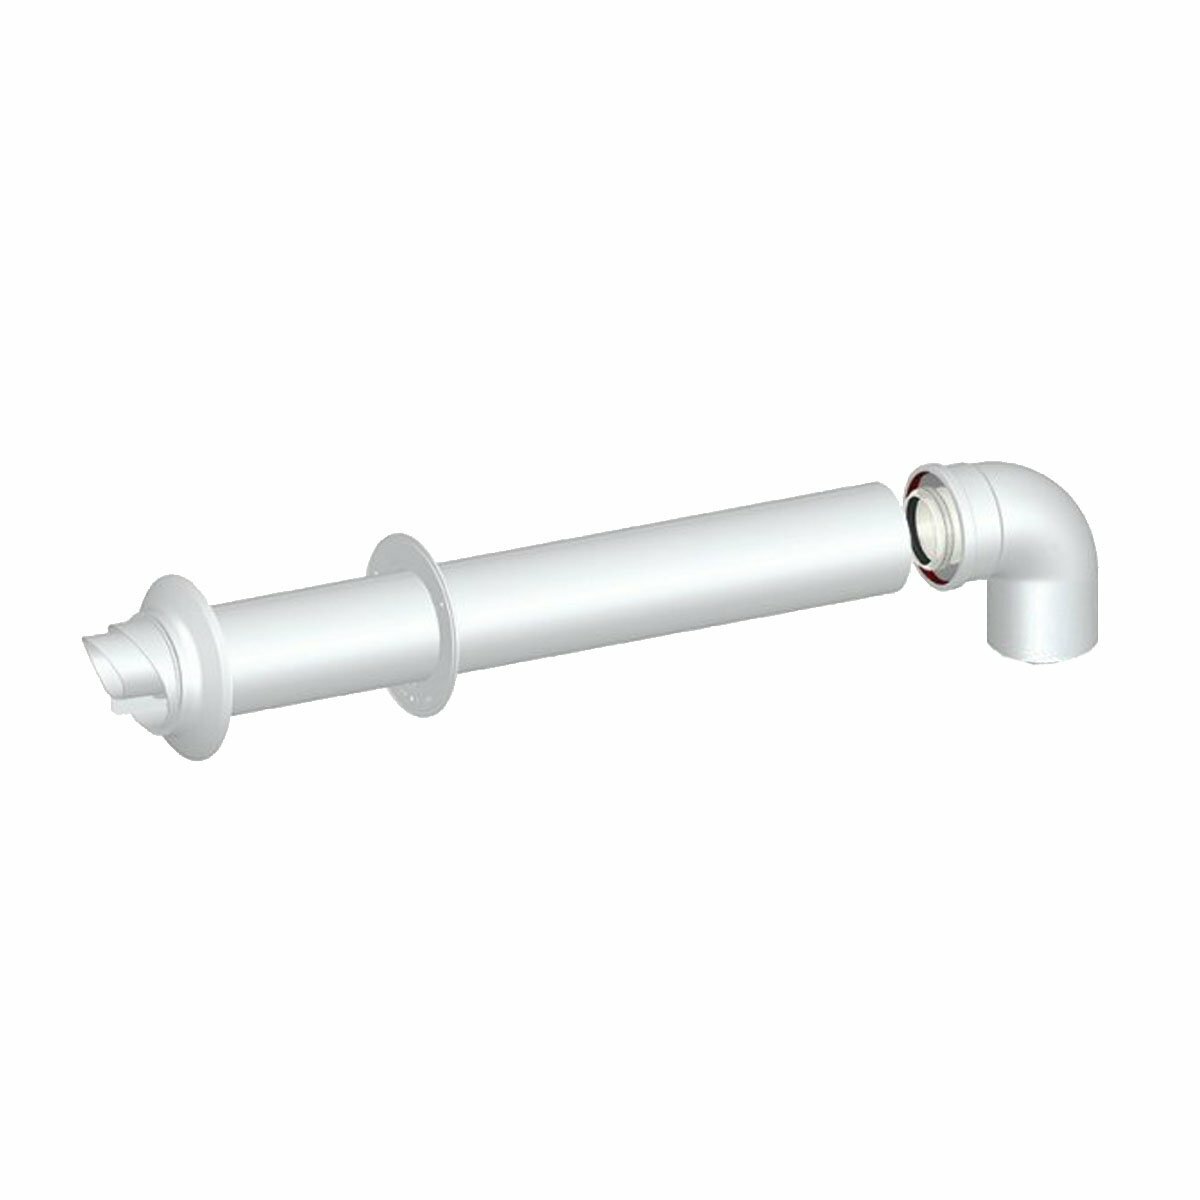 Horizontal wall coaxial fume exhaust kit ø 60/100 M/F condensing boilers - Kit 3 various brands